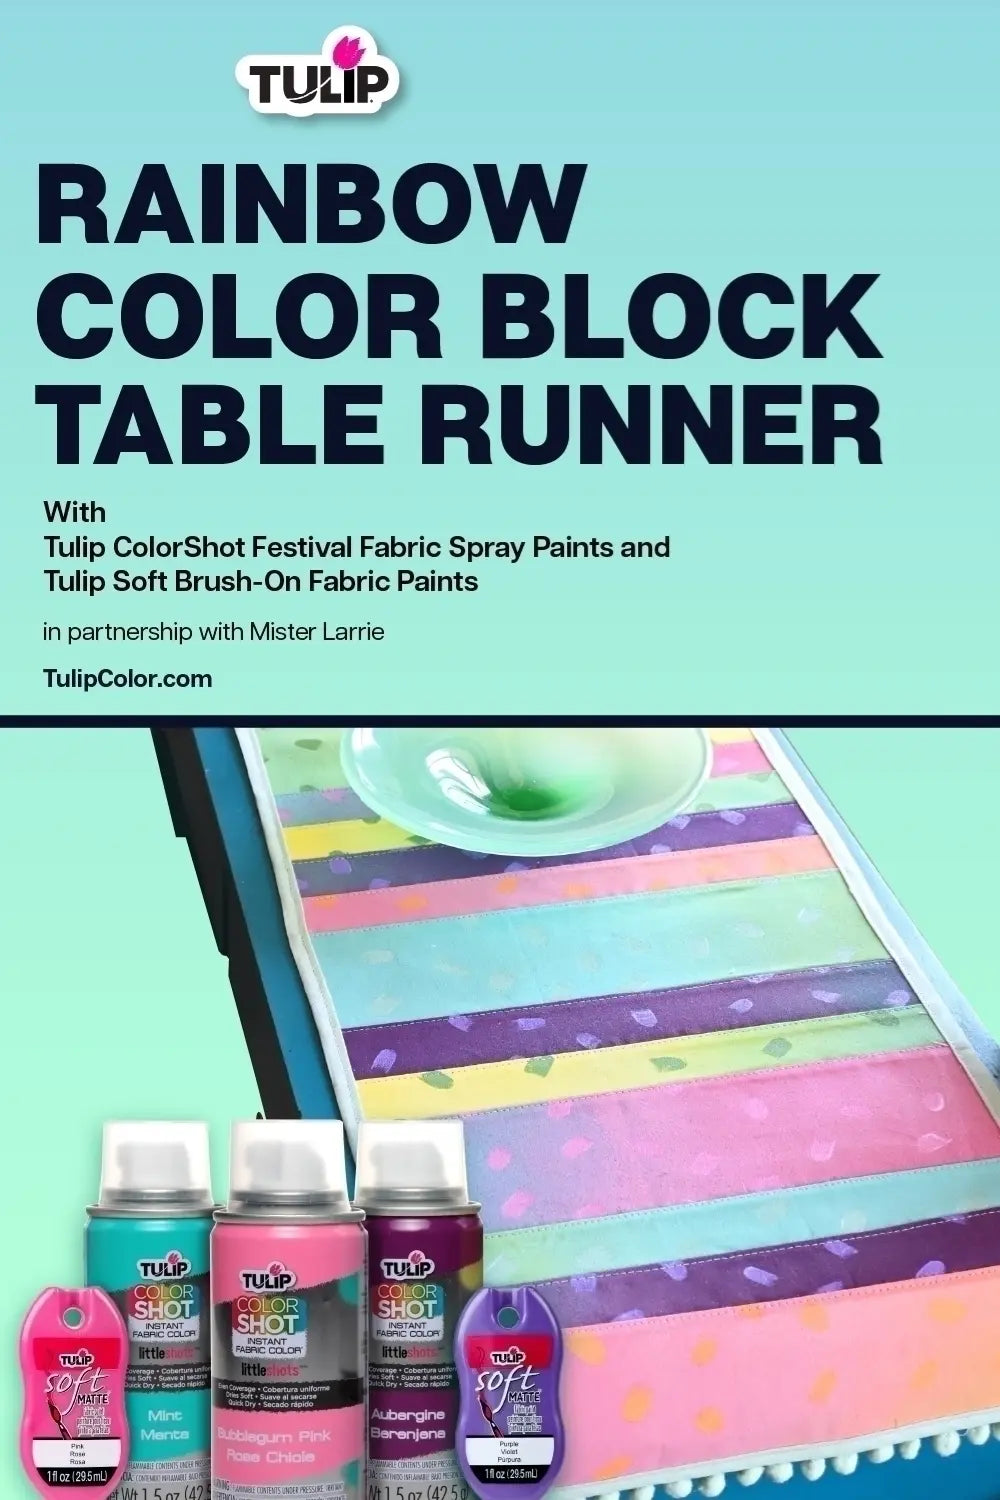 Rainbow Color Block Table Runner with Fabric Spray Paint